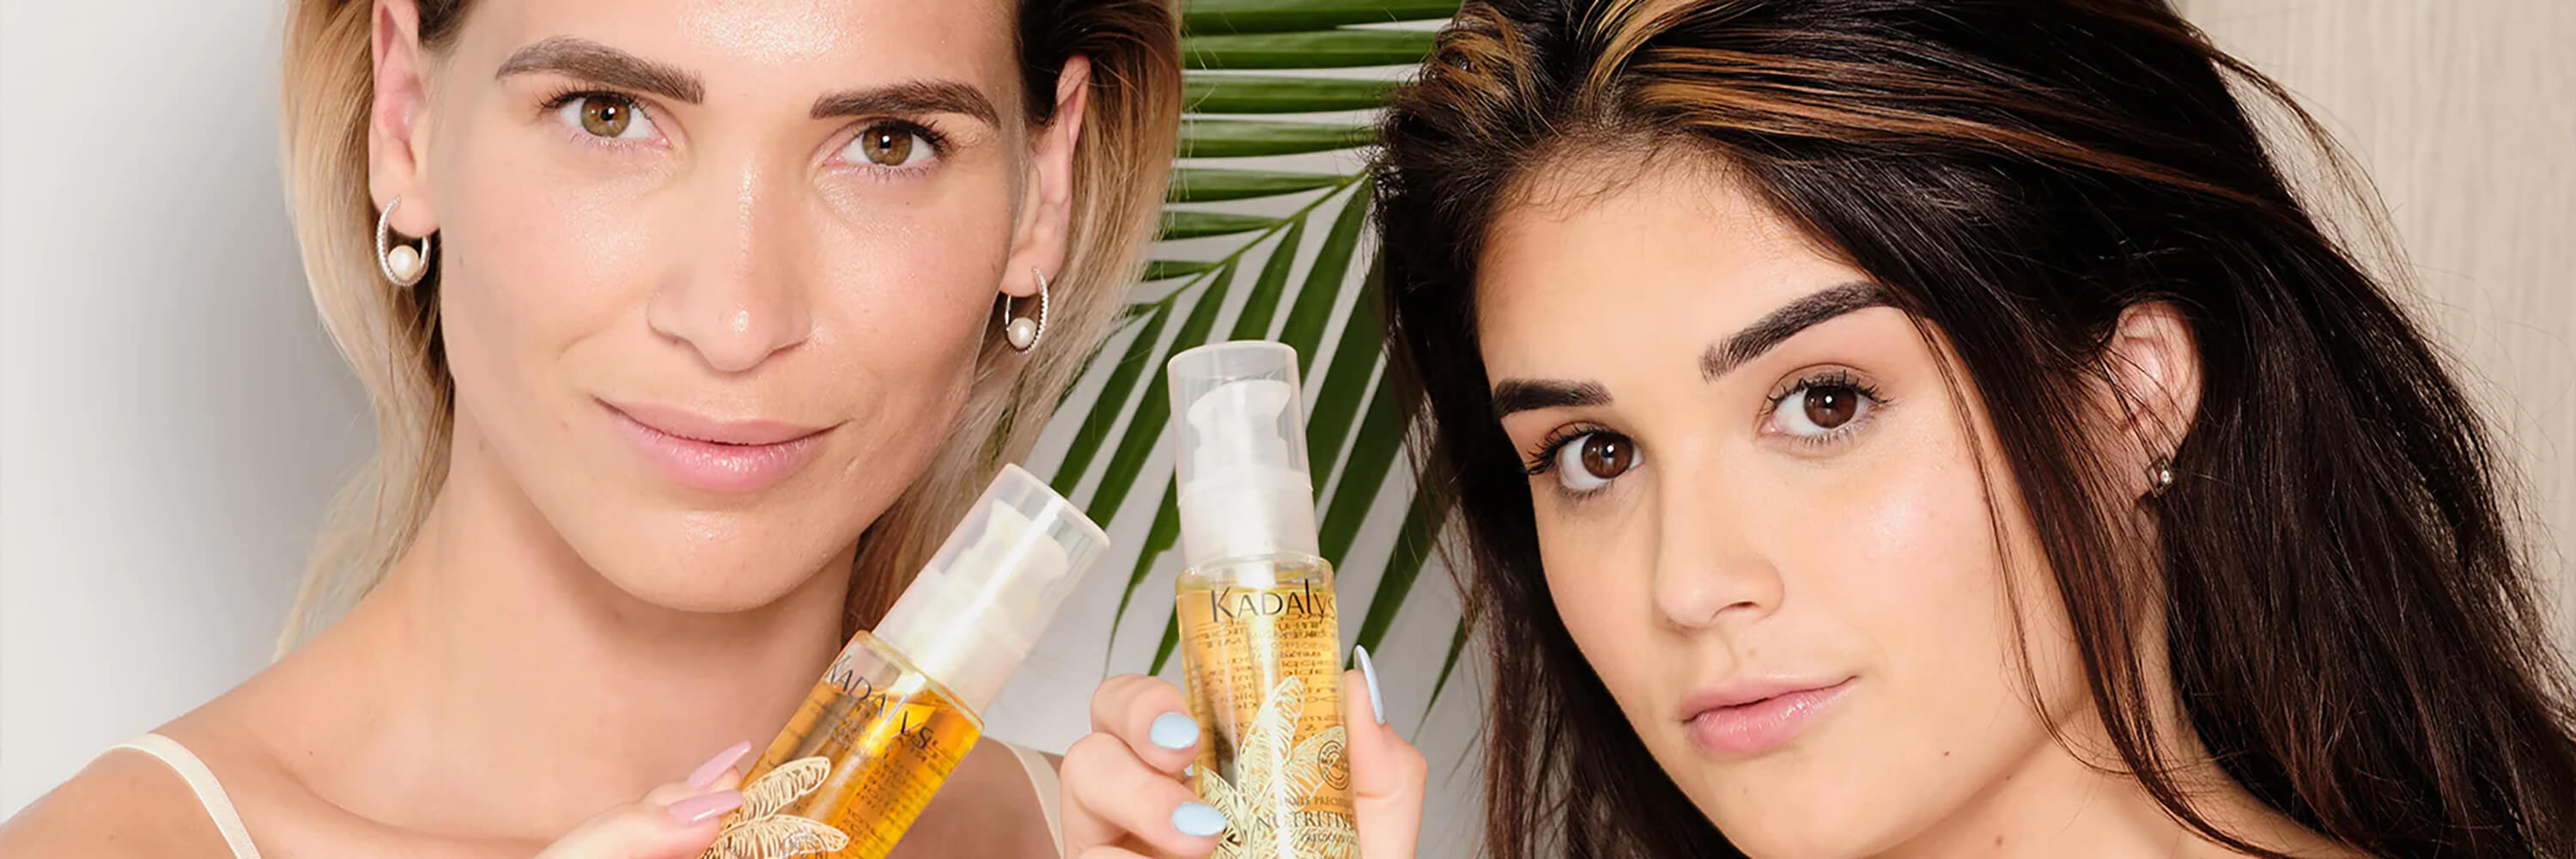 Image of two women holding Kadalys face oils | face and hair oil products